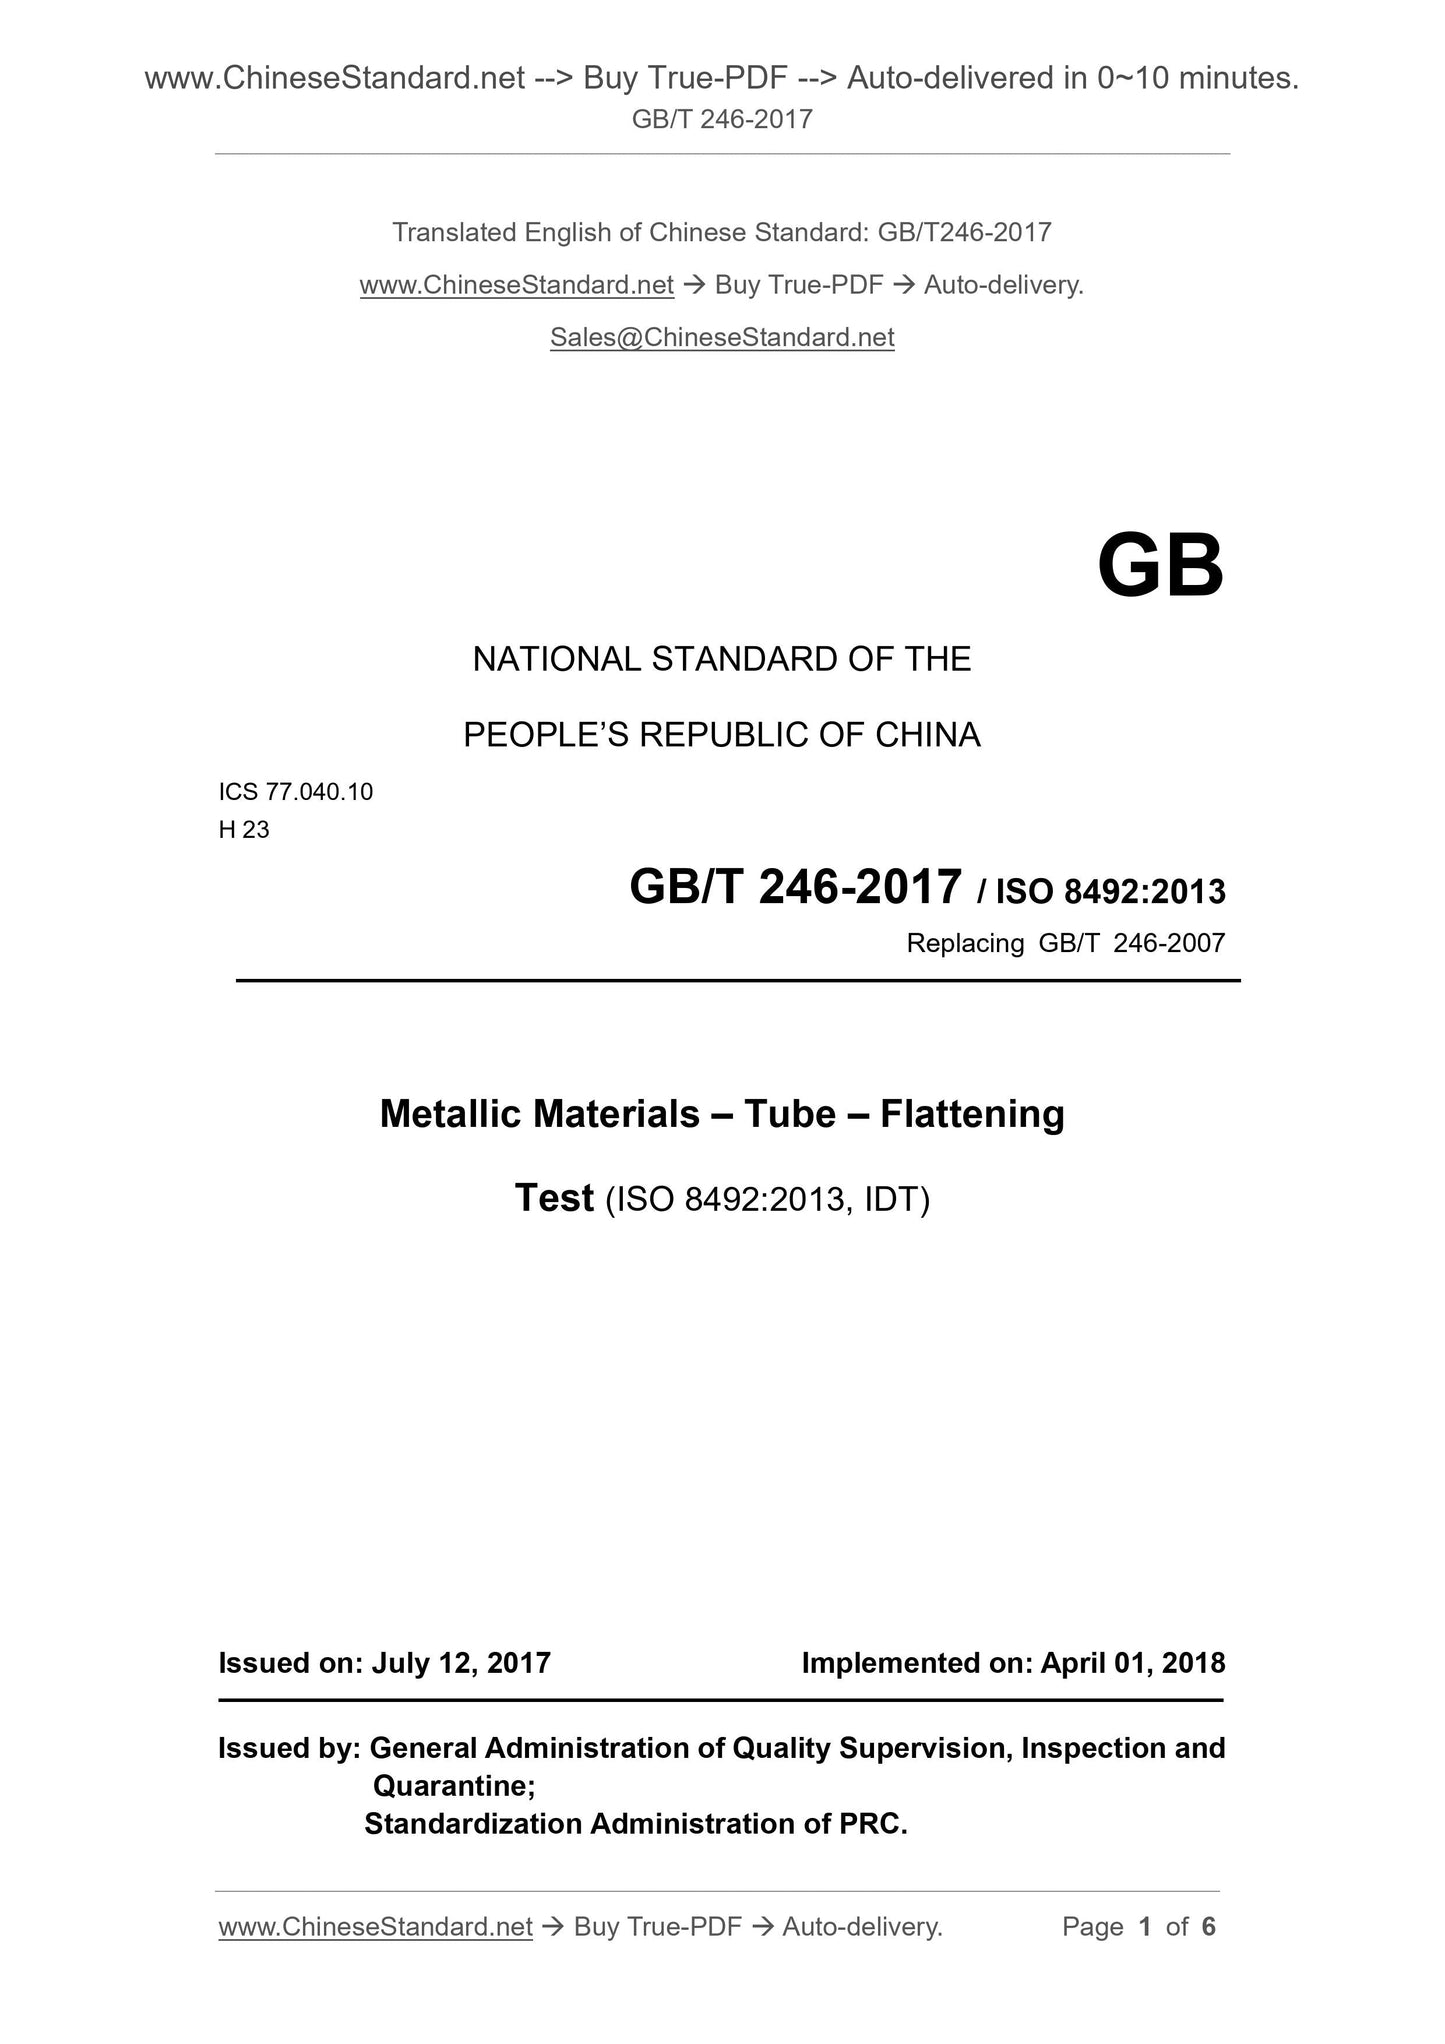 GB/T 246-2017 Page 1